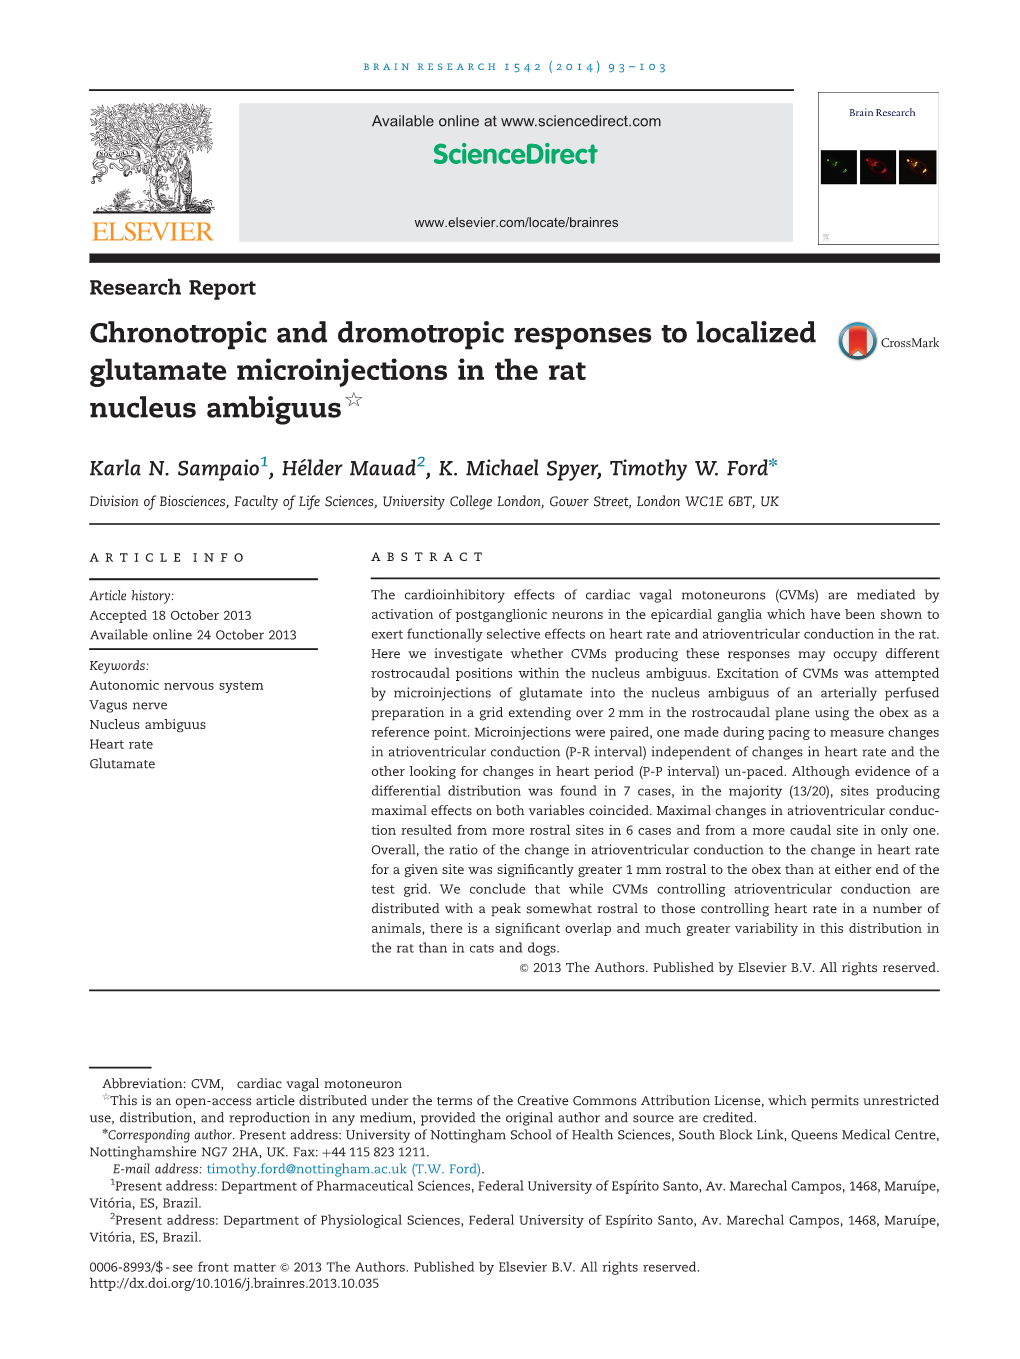 Chronotropic and Dromotropic Responses to Localized Glutamate Microinjections in the Rat $ Nucleus Ambiguus